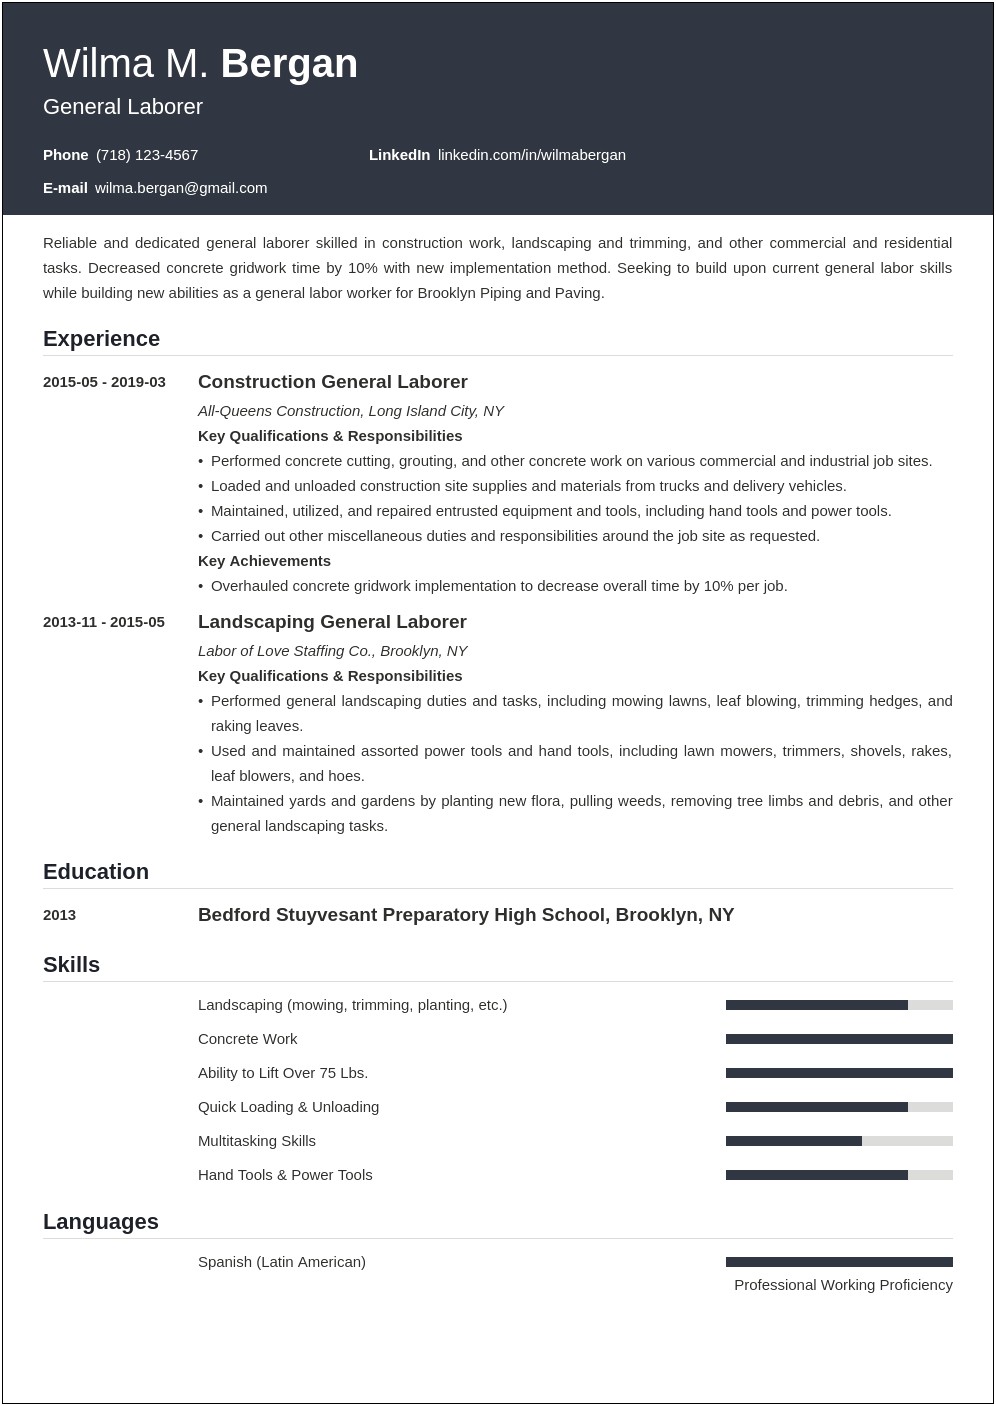 Resume Objective Statement For General Labor